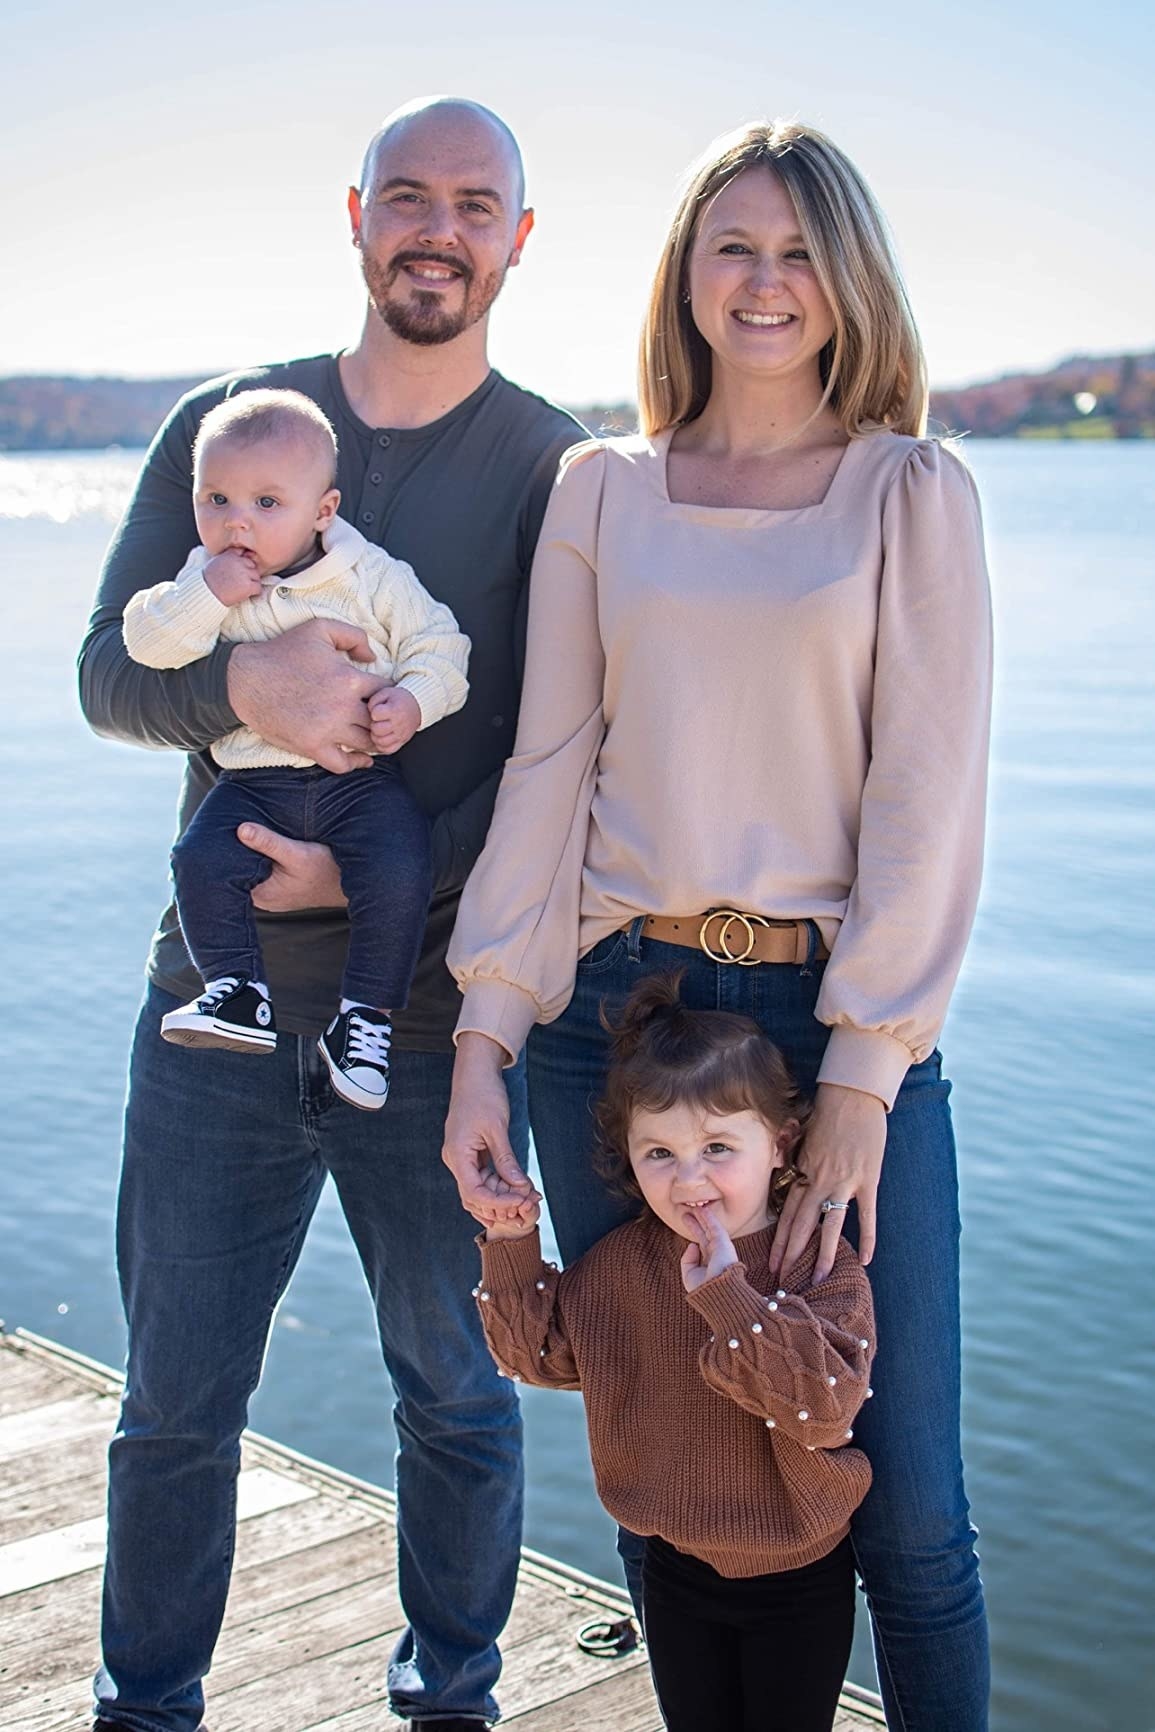 A reviewer wearing the cream top in a family photo with jeans, a little kid in brown and black, a reviewer in a grey top and jeans holding a baby in cream and denim